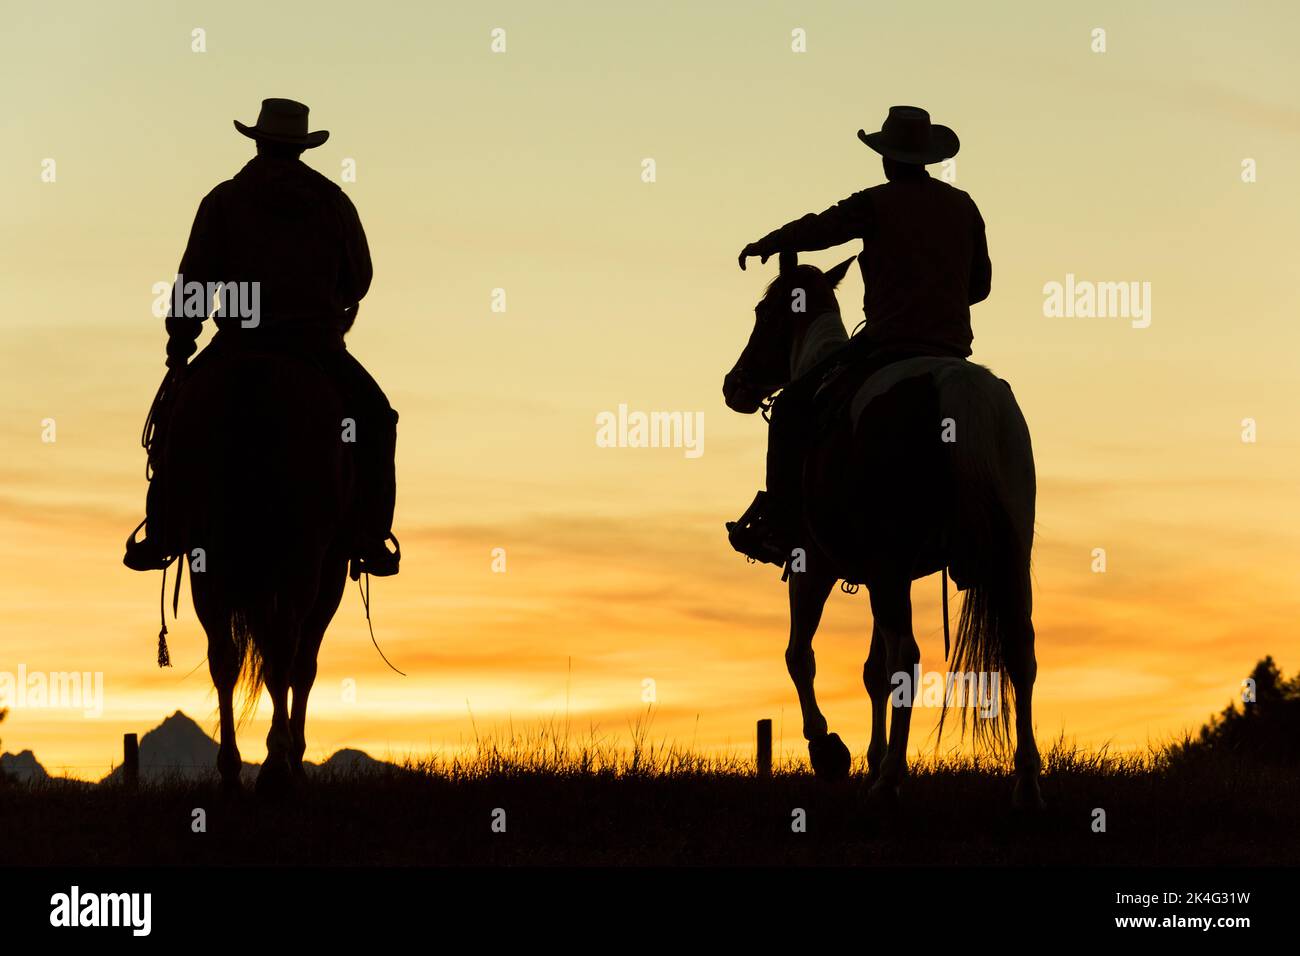 Cowboys & horses in silhouette at dawn on ranch, British Colombia, Canada Stock Photo